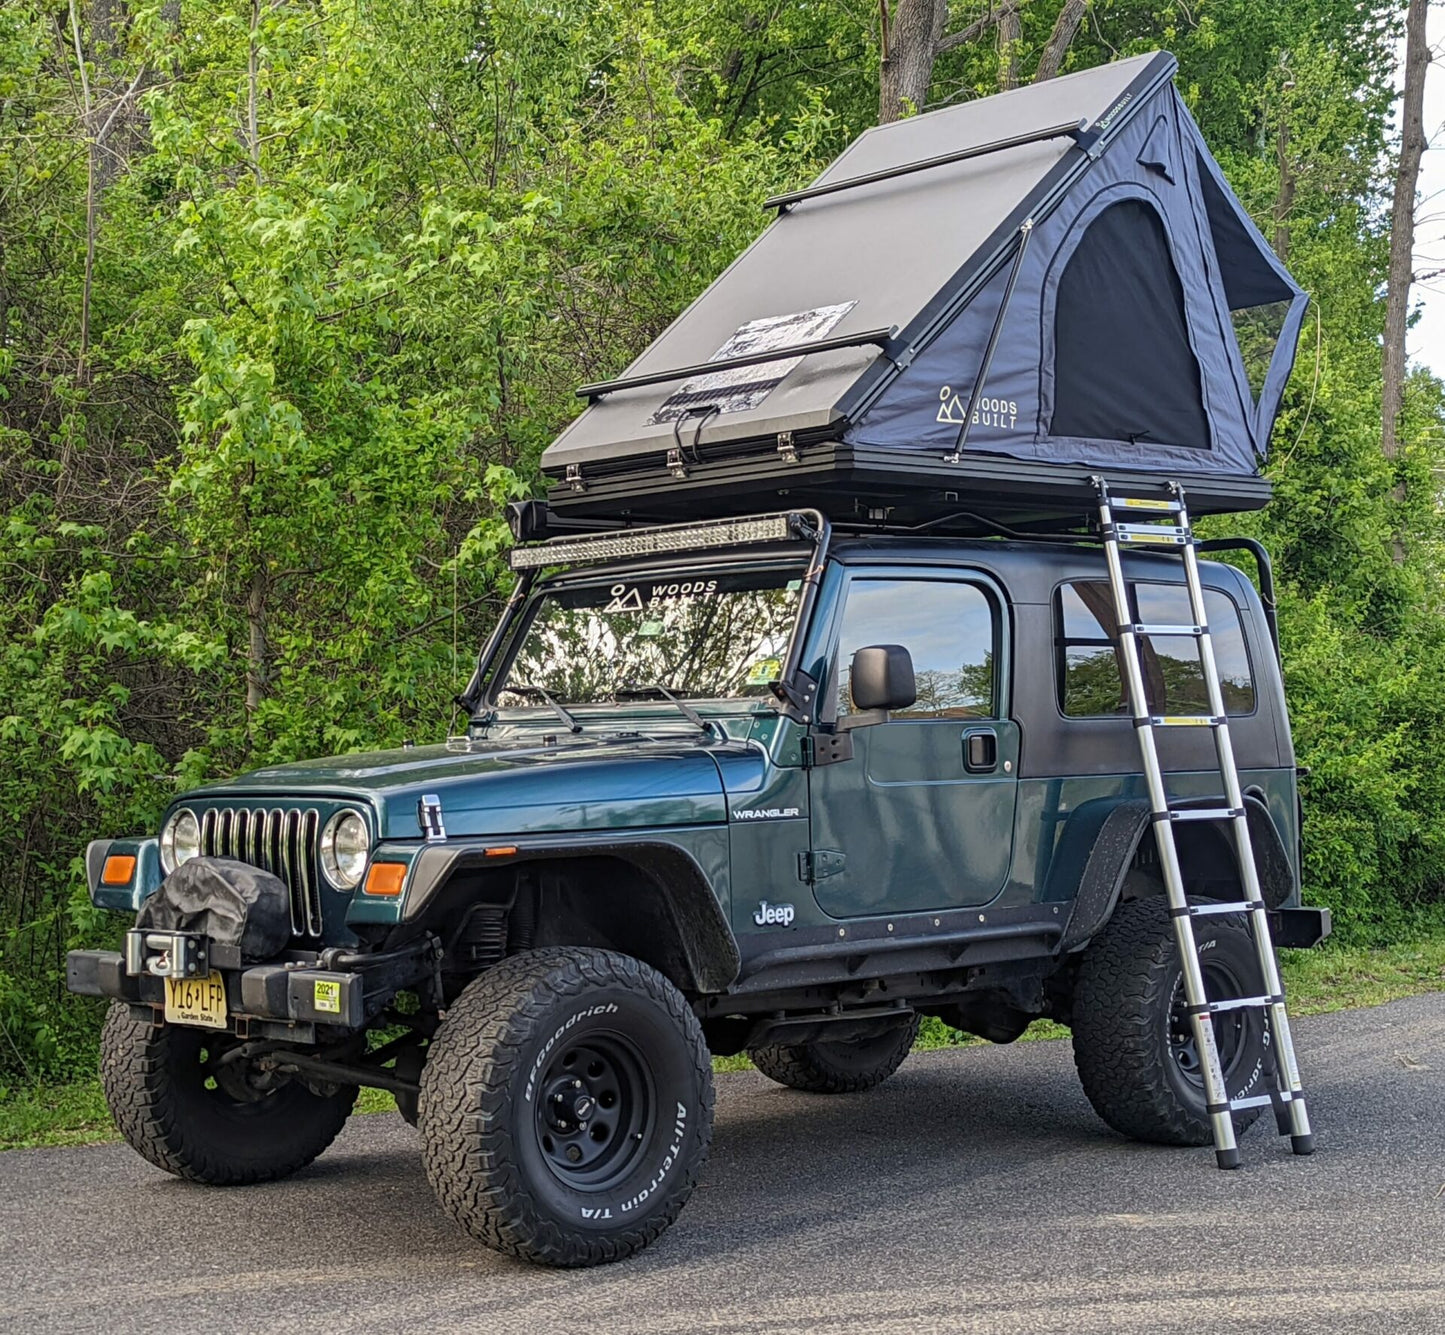 SALE! Mountaineer Aluminum Roof Top Tent with Solar